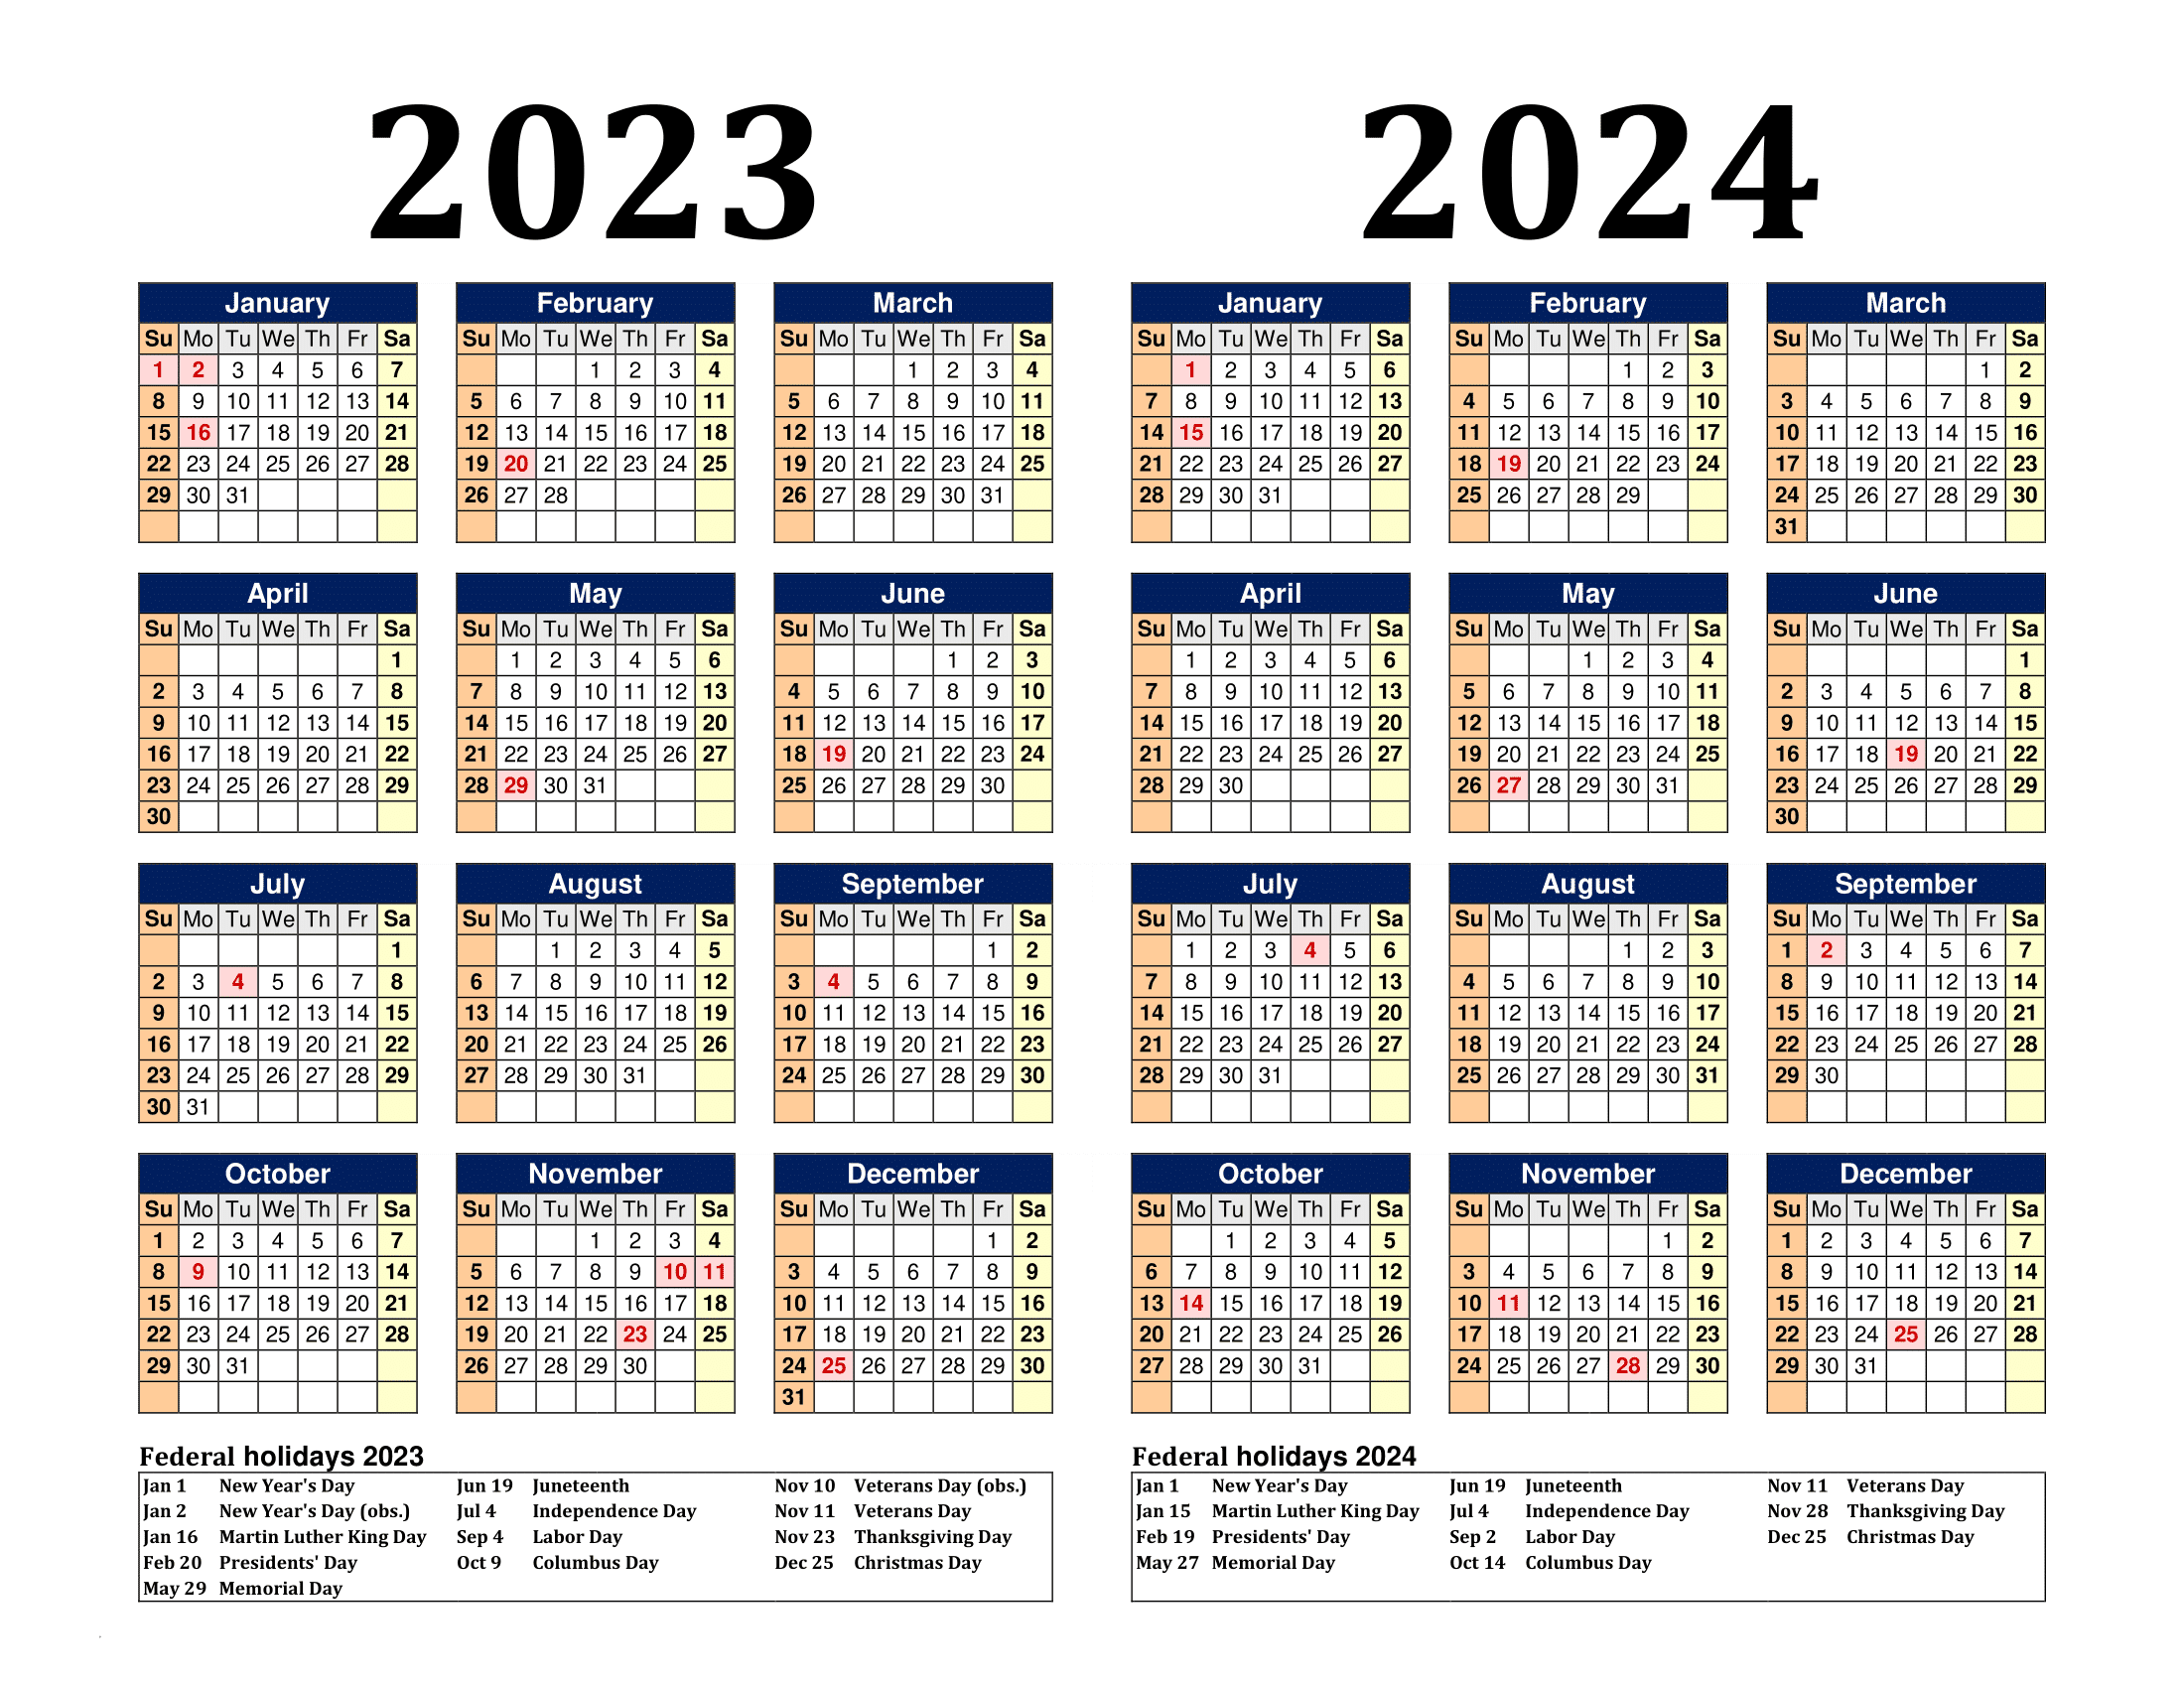 Free Printable Two Year Calendar Templates For 2023 And 2024 In Pdf for Printable Monthly Calendar 2023-2024